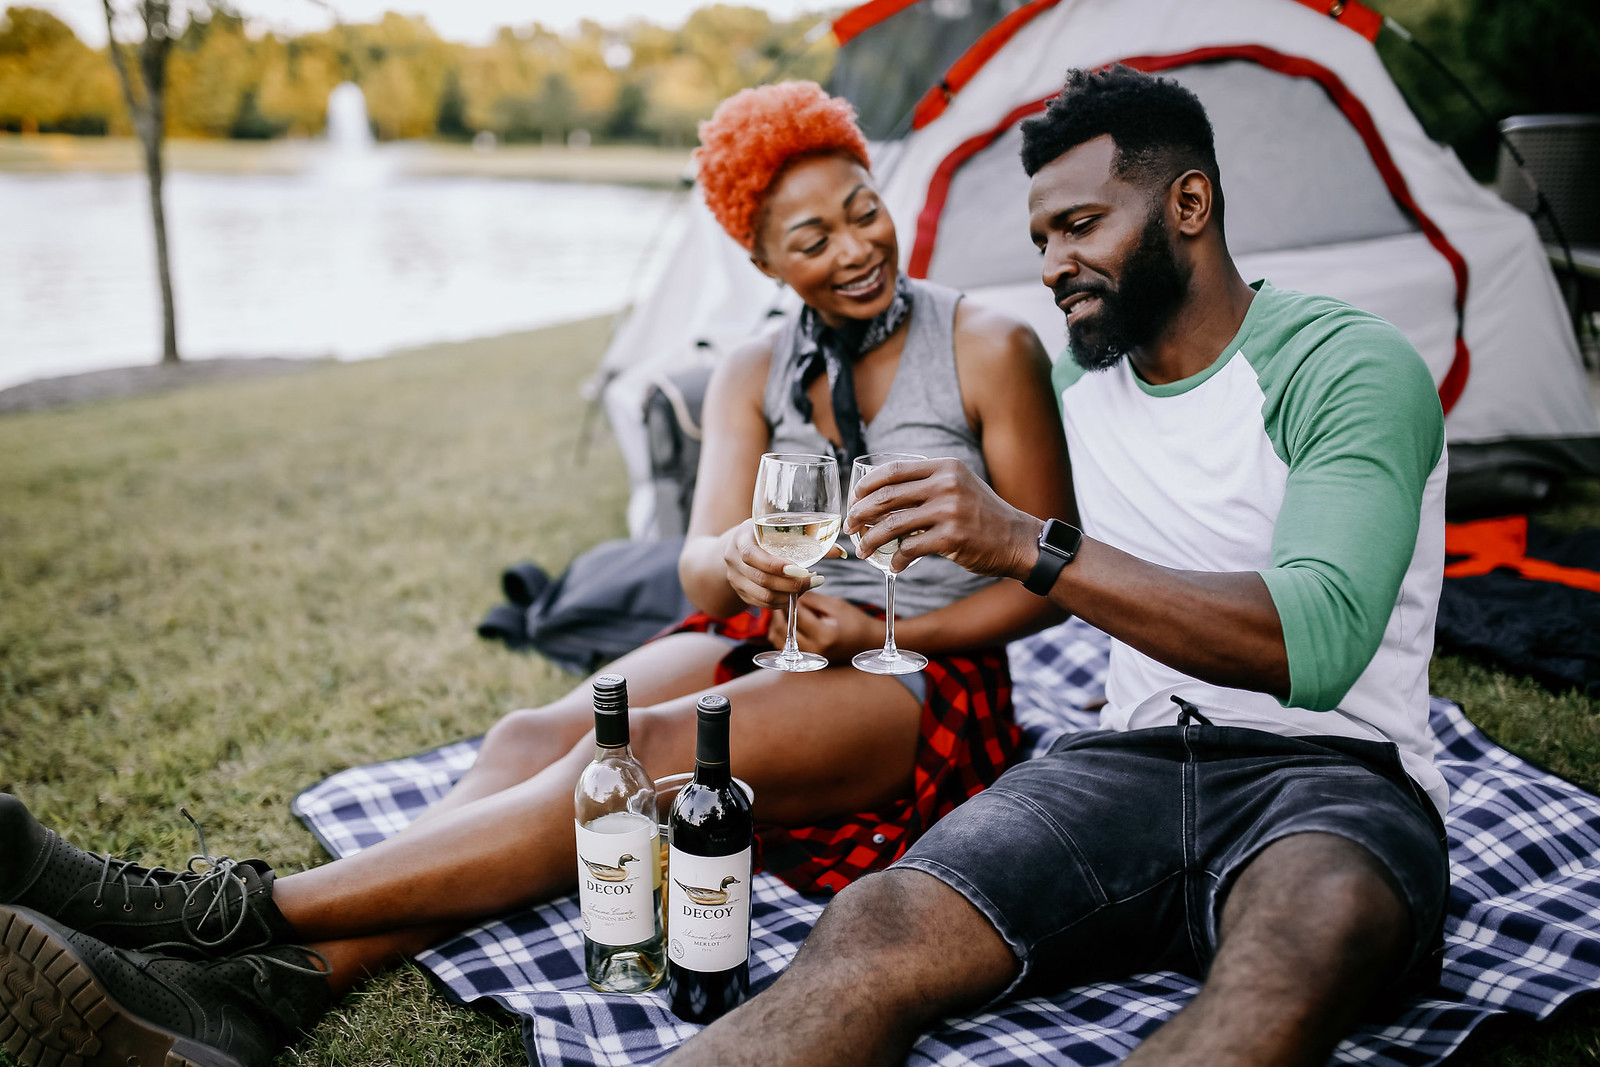 camping in dallas with decoy wine